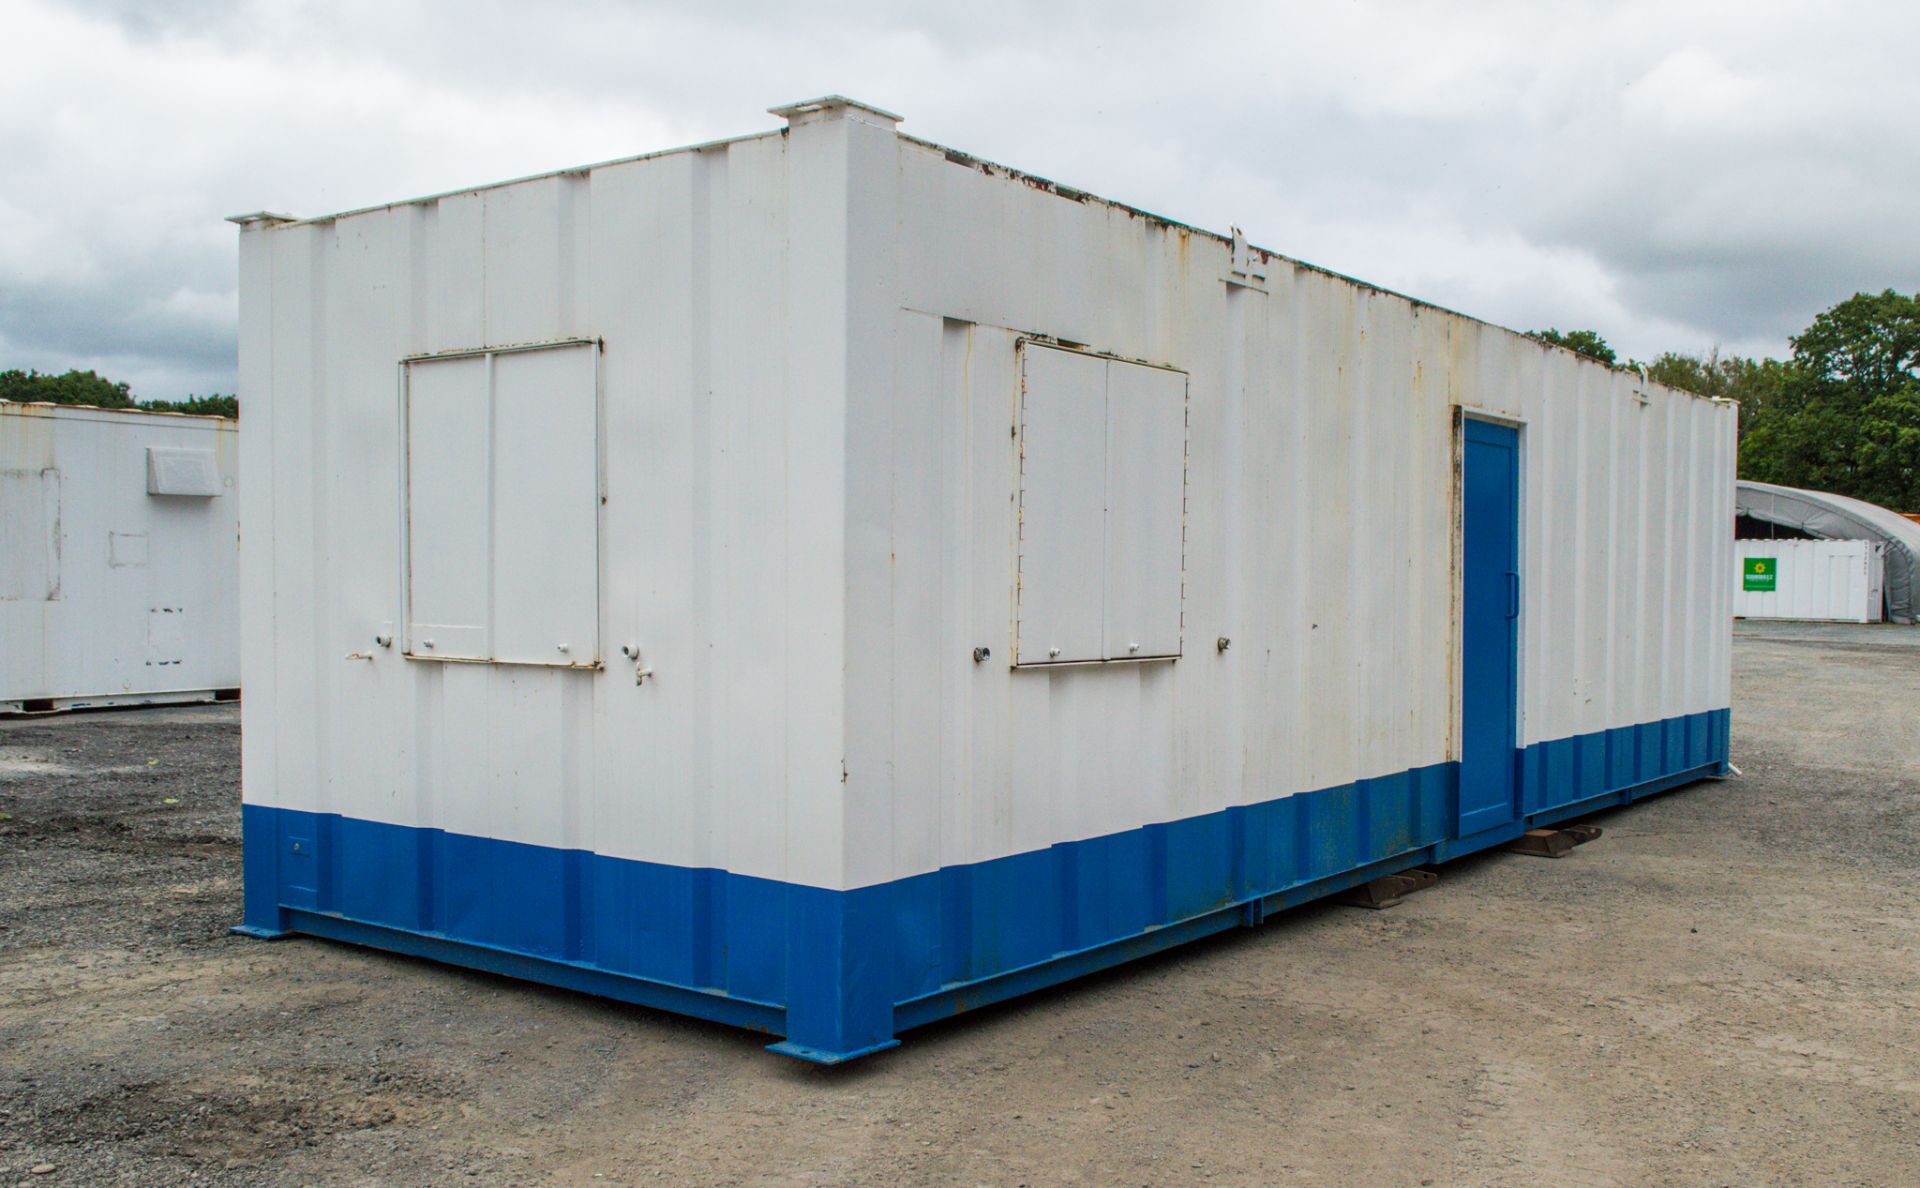 32ft x 10ft steel anti office site unit ** No keys but the doors are unlocked ** GT30212